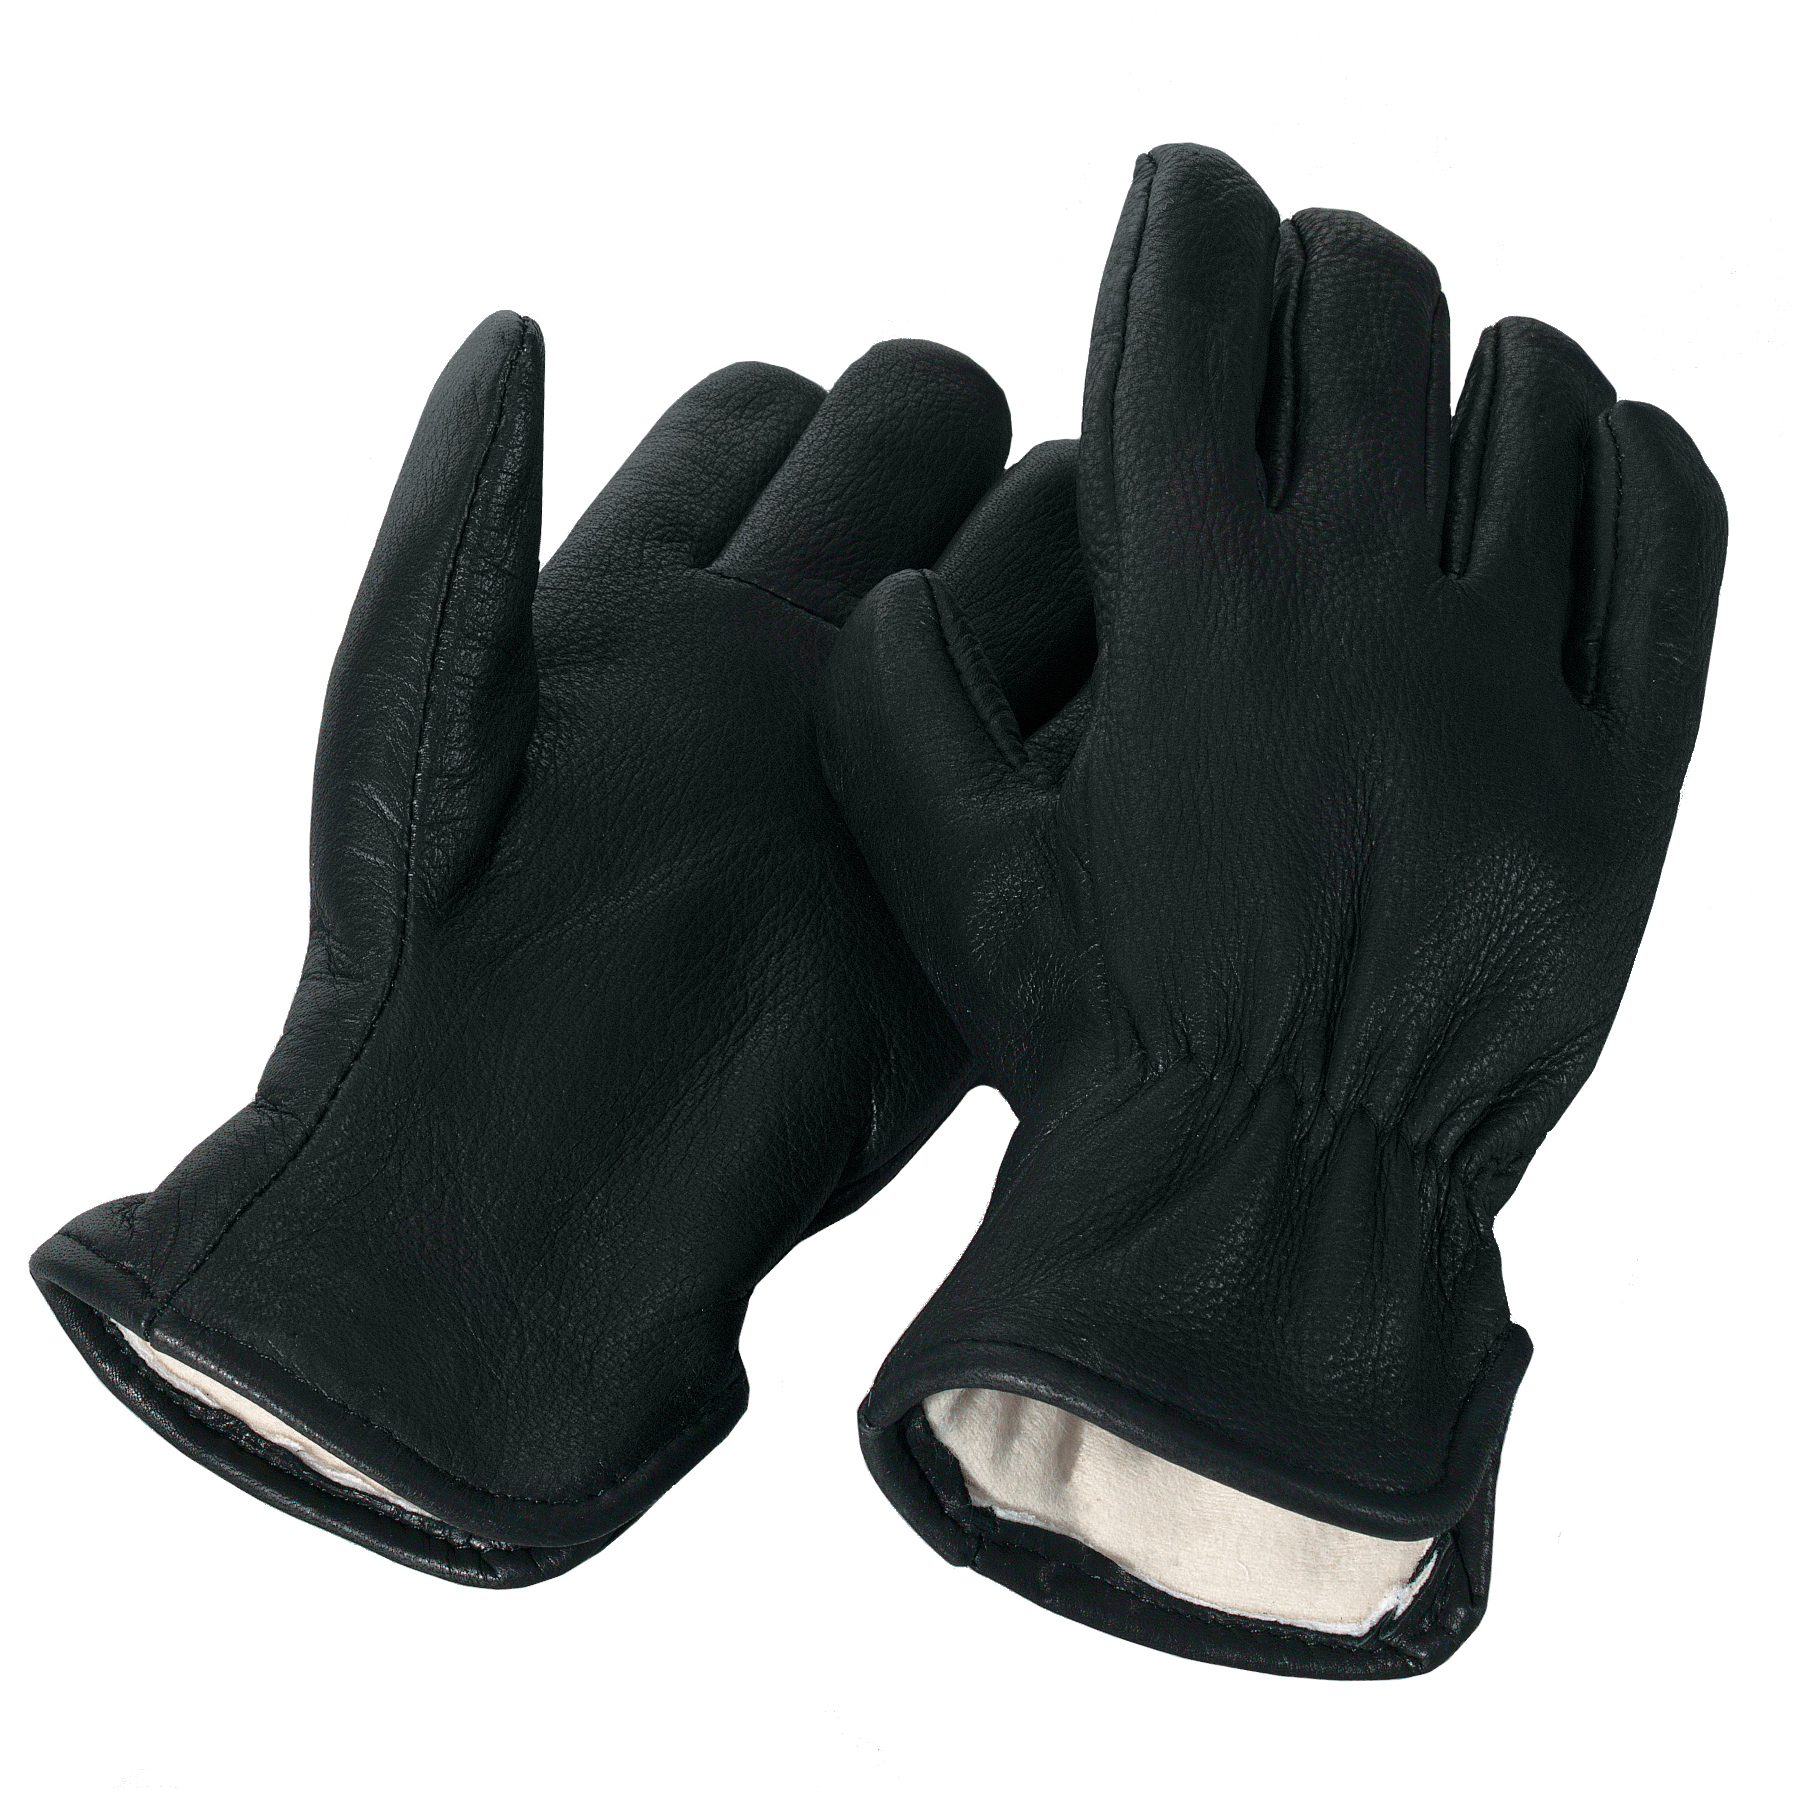 Insulated Leather Work Gloves